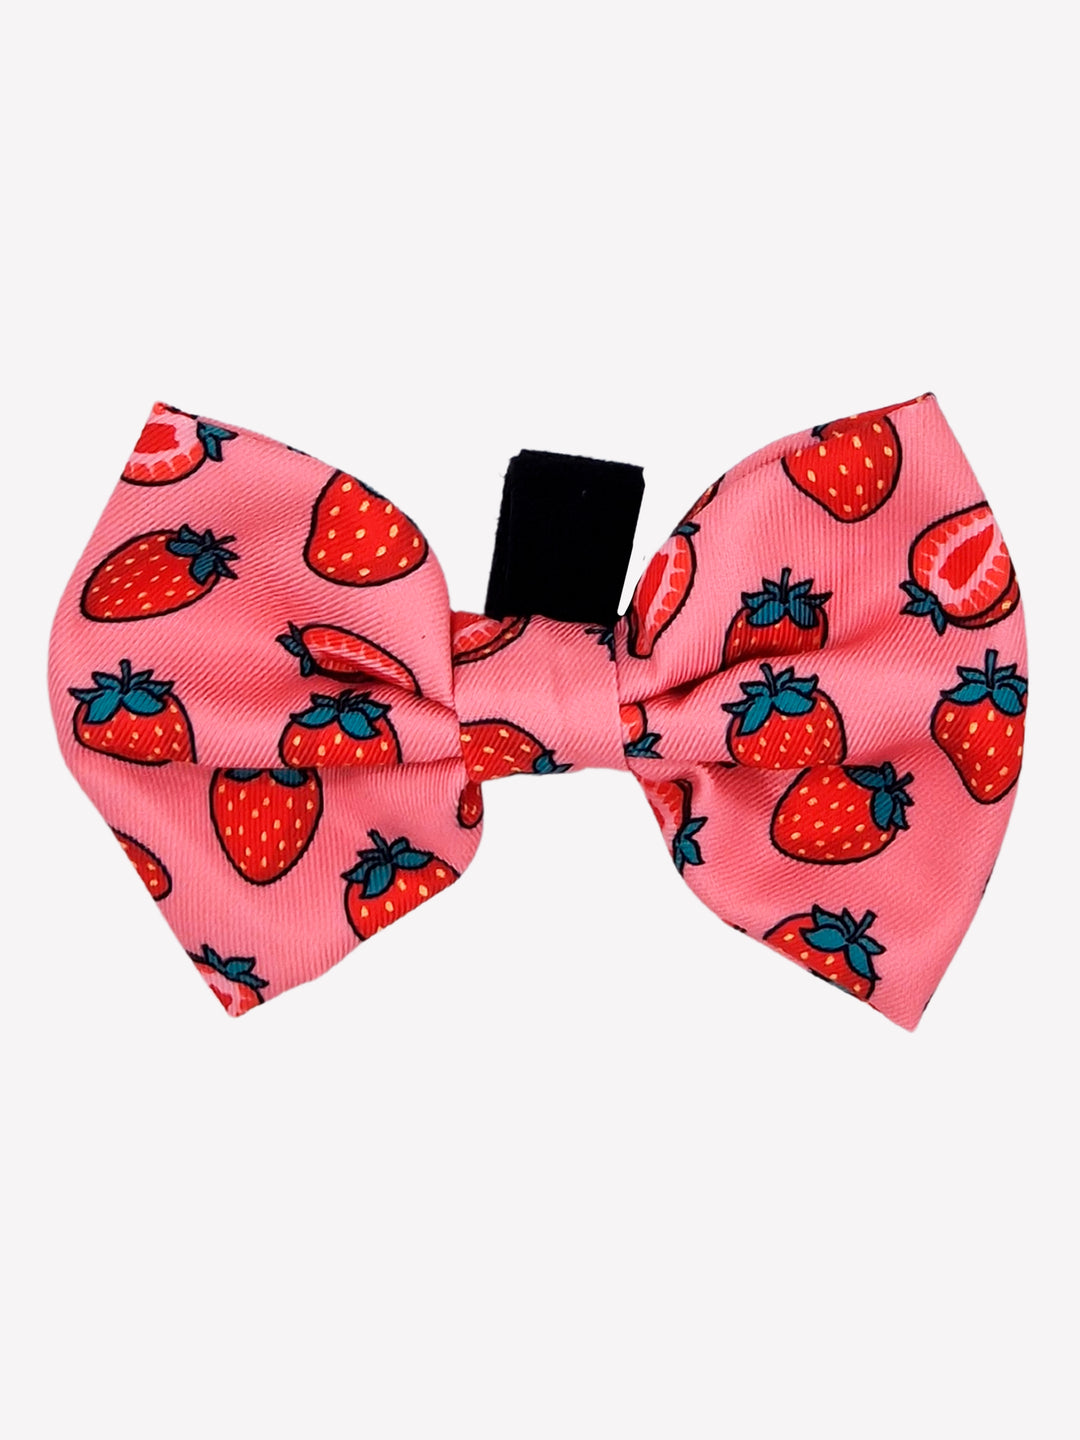 BERRY LOVE BOW TIE FOR DOGS